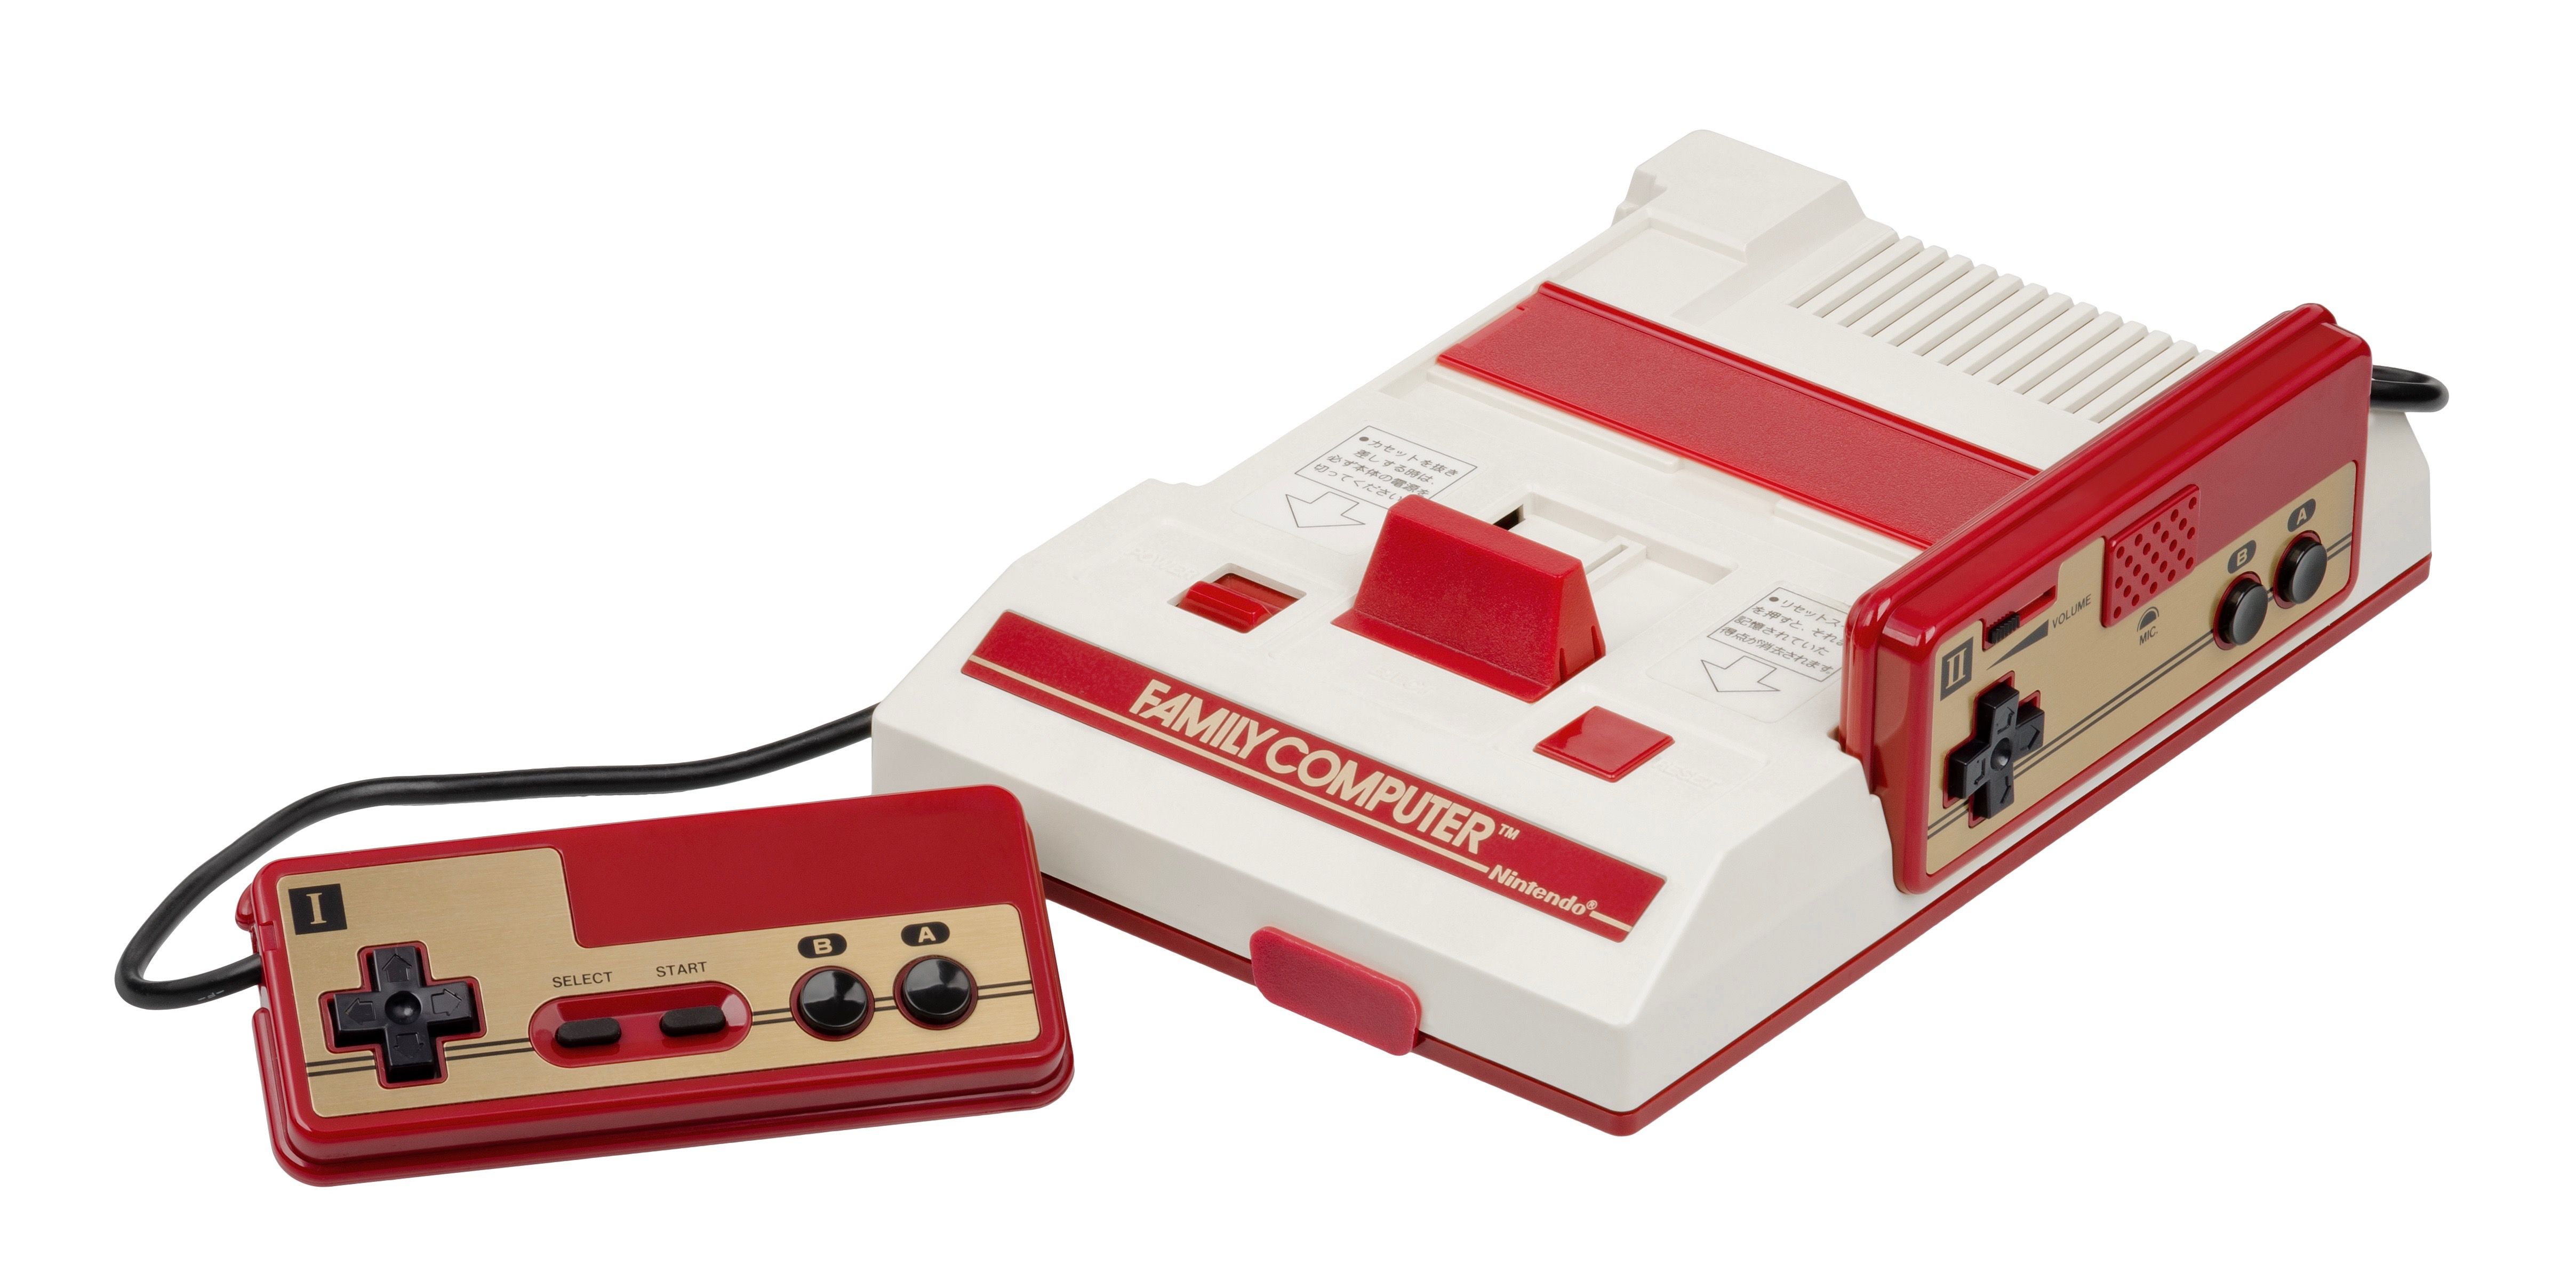 25 Things Only Experts Know The Original Nintendo Can Do